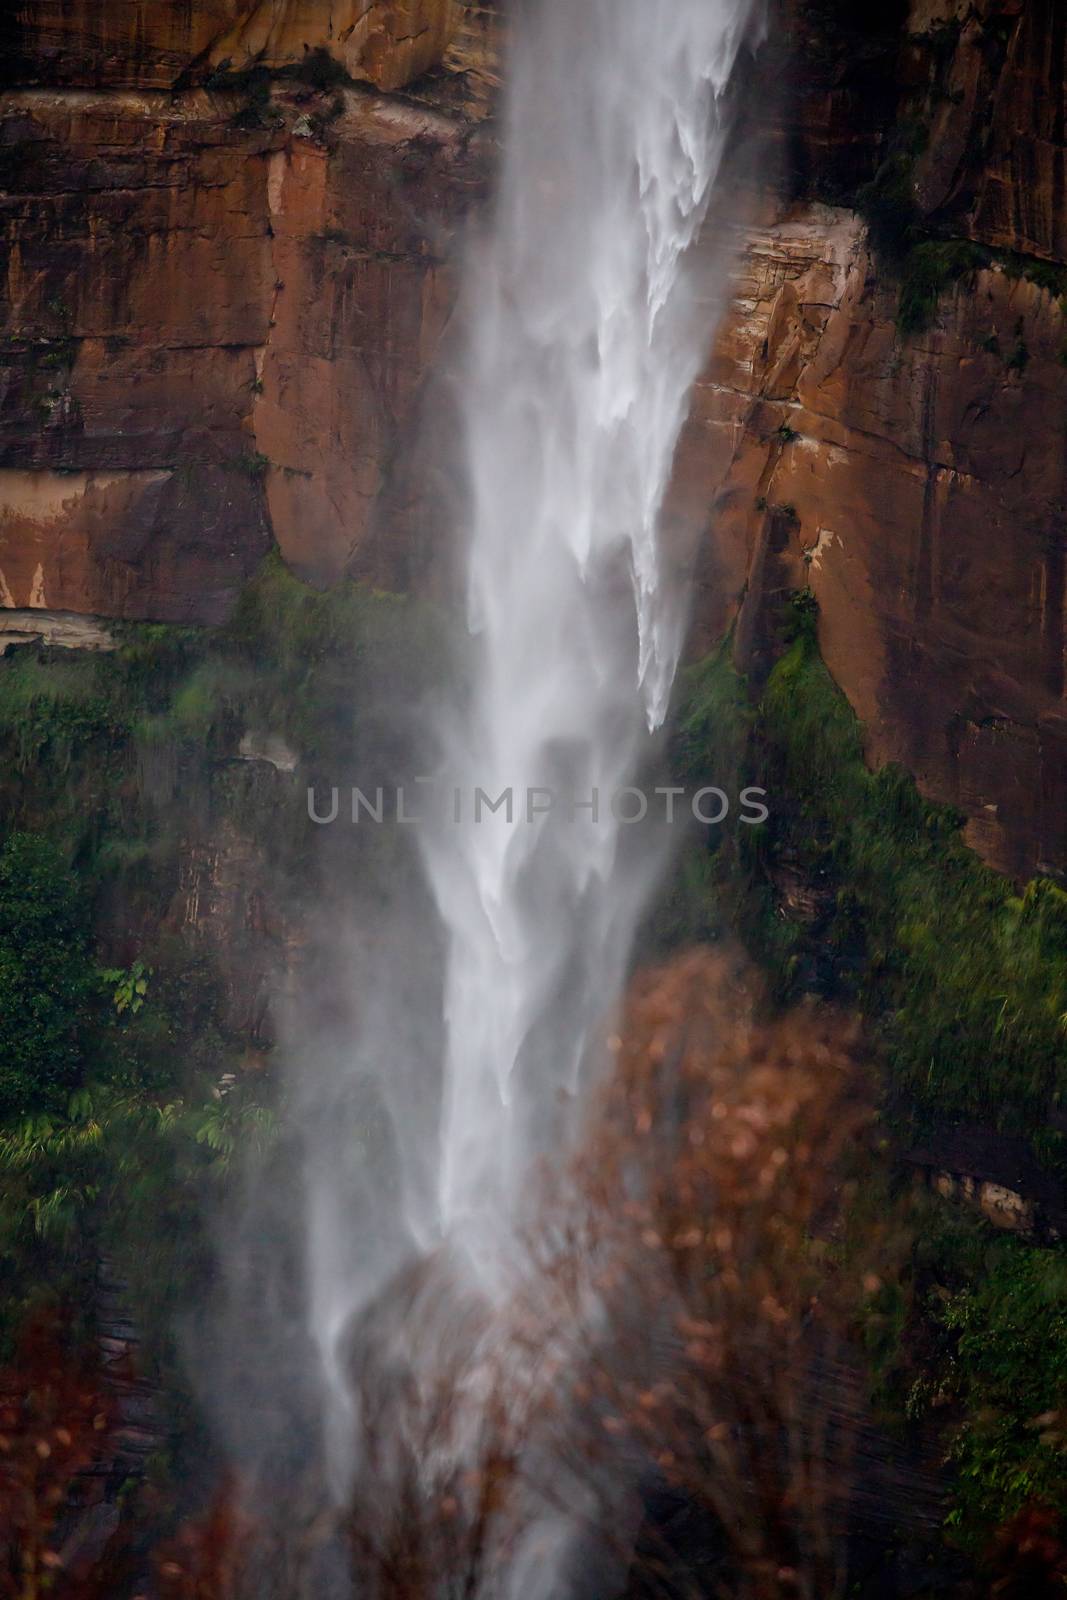 Powerful waterfall tumbling over sandstone cliffs after rain, its movement patterns vary as it falls fast to the bottom